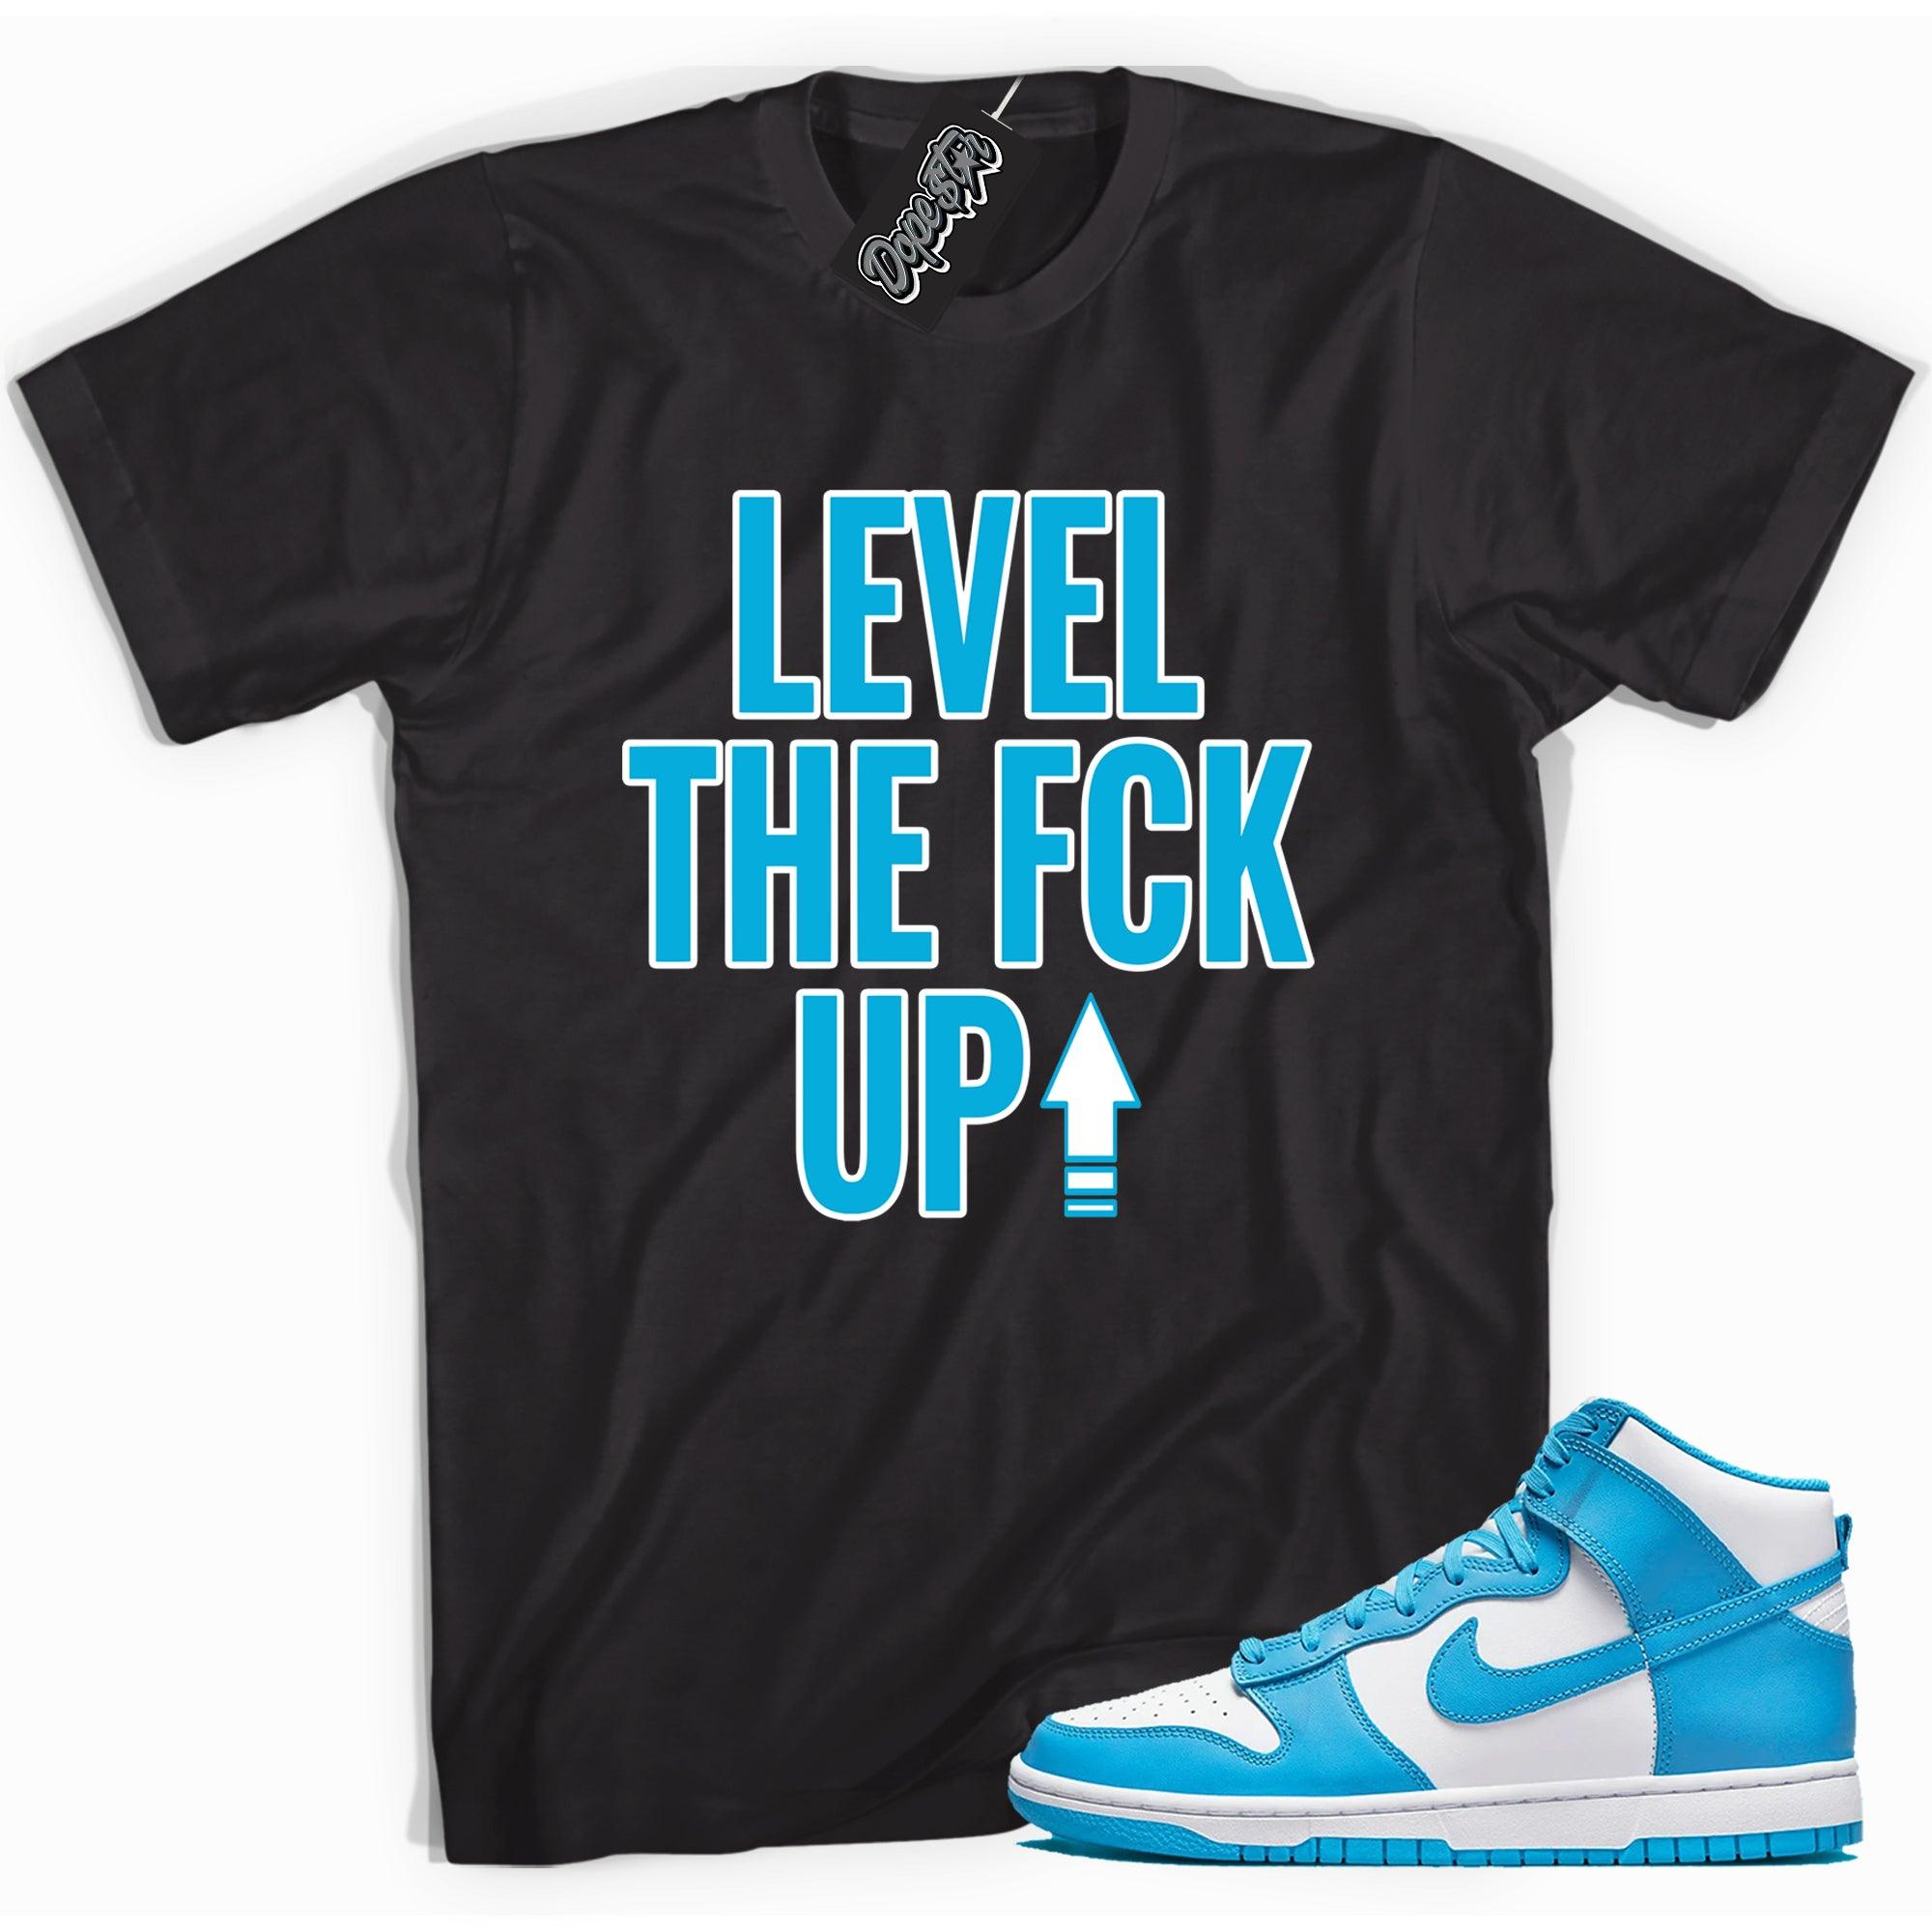 Cool black graphic tee with 'Level Up' print, that perfectly matches Nike Dunk High Retro Laser Blue sneakers.